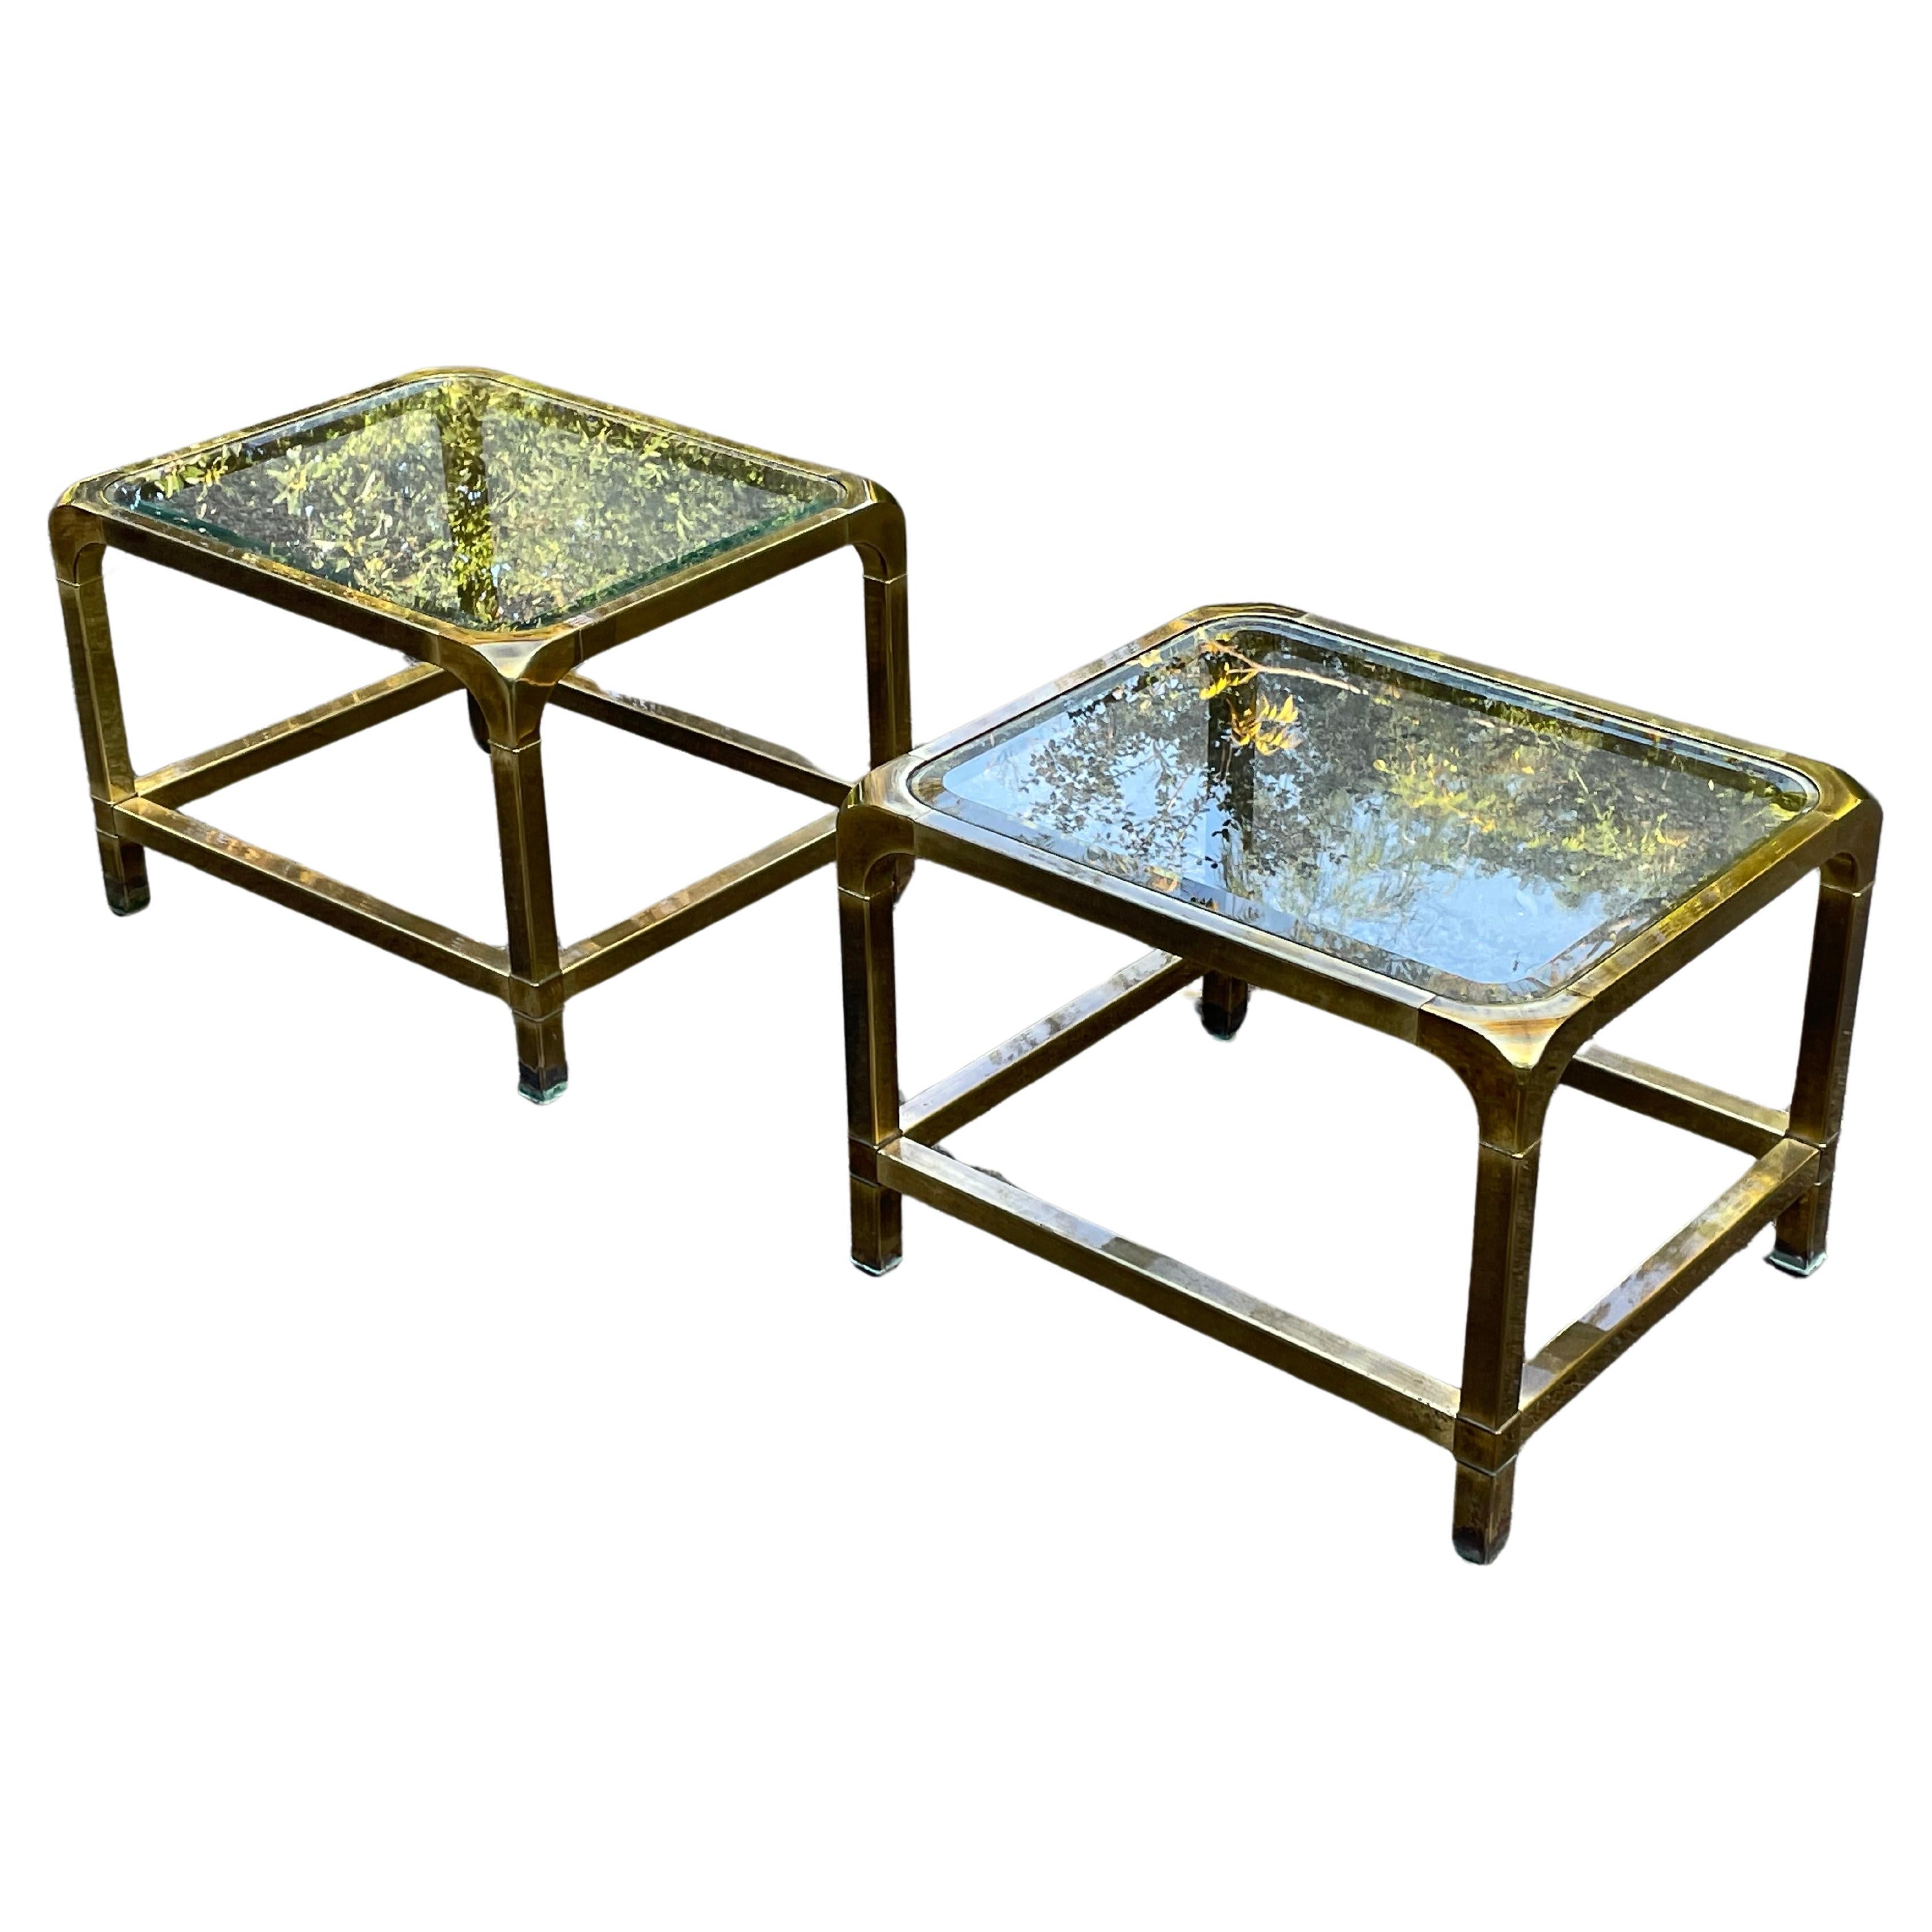 Striking pair of Mastercraft brass end tables with glass tops. Rich gorgeous patina to brass. Glass has bevel. Circa 1970.

We currently have this paired with a pair of Milo Baughman Parsons Chairs in 
Yellow and a legendary Jorge Salzsupin